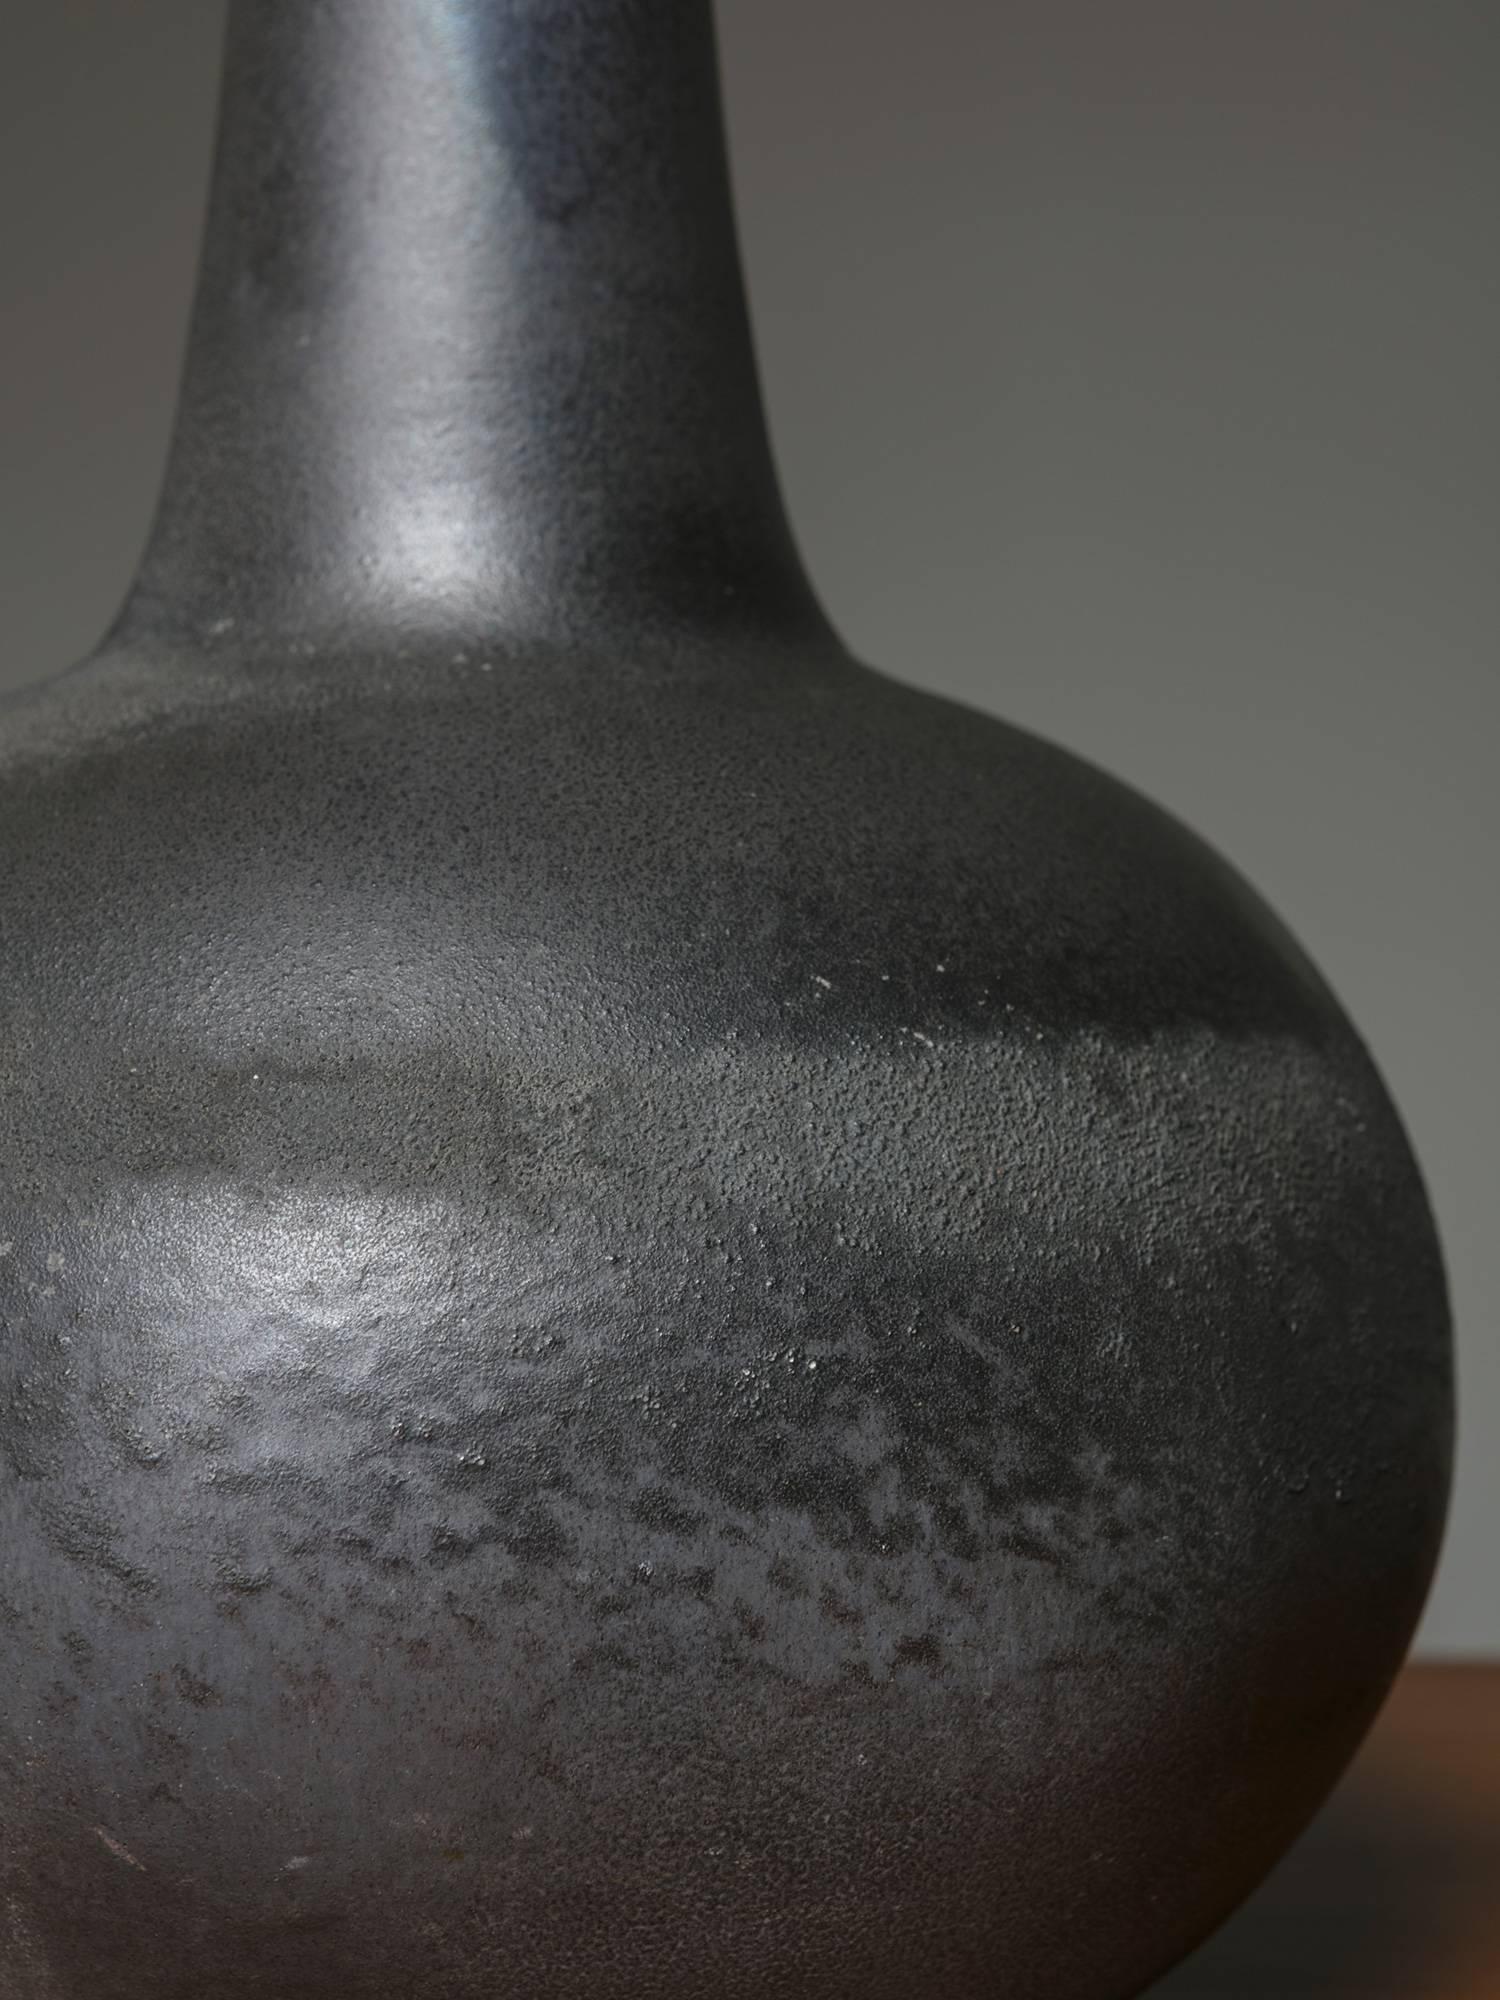 Remarkable ceramic vase with delicate surface finish.